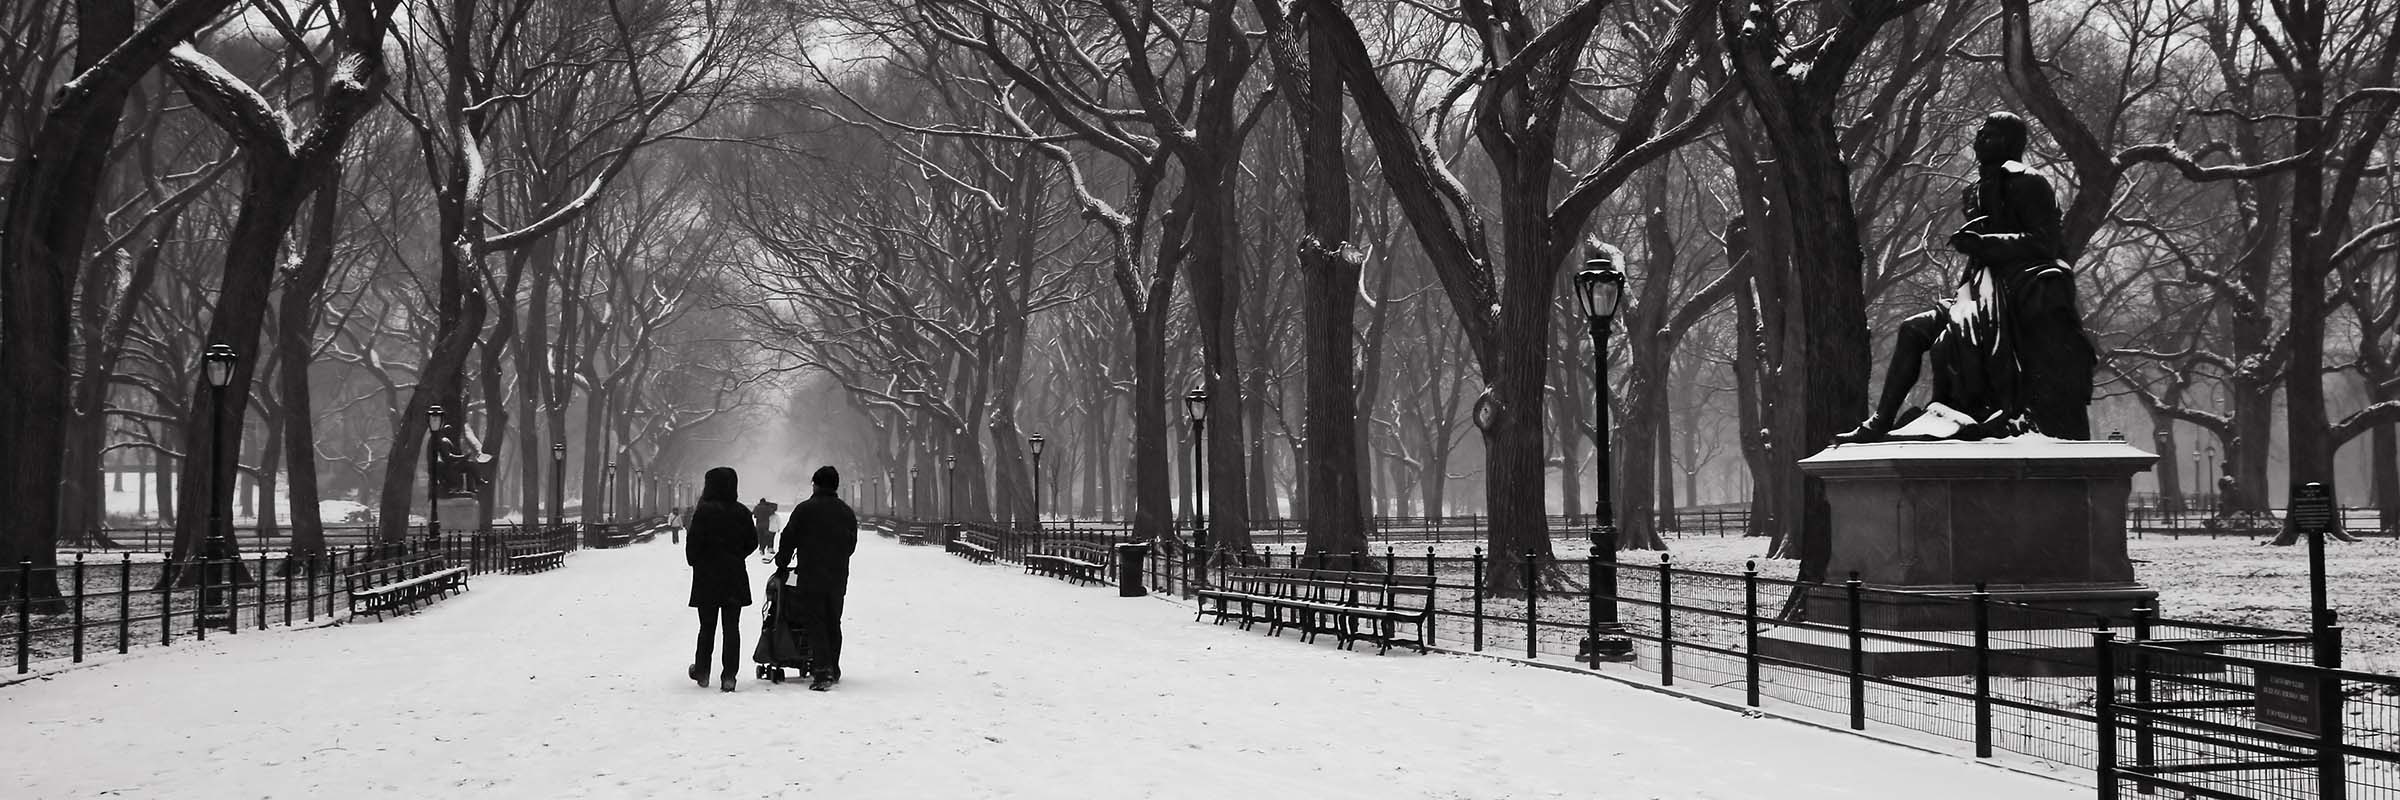 Central Park - The Mall in wintertime in black and white